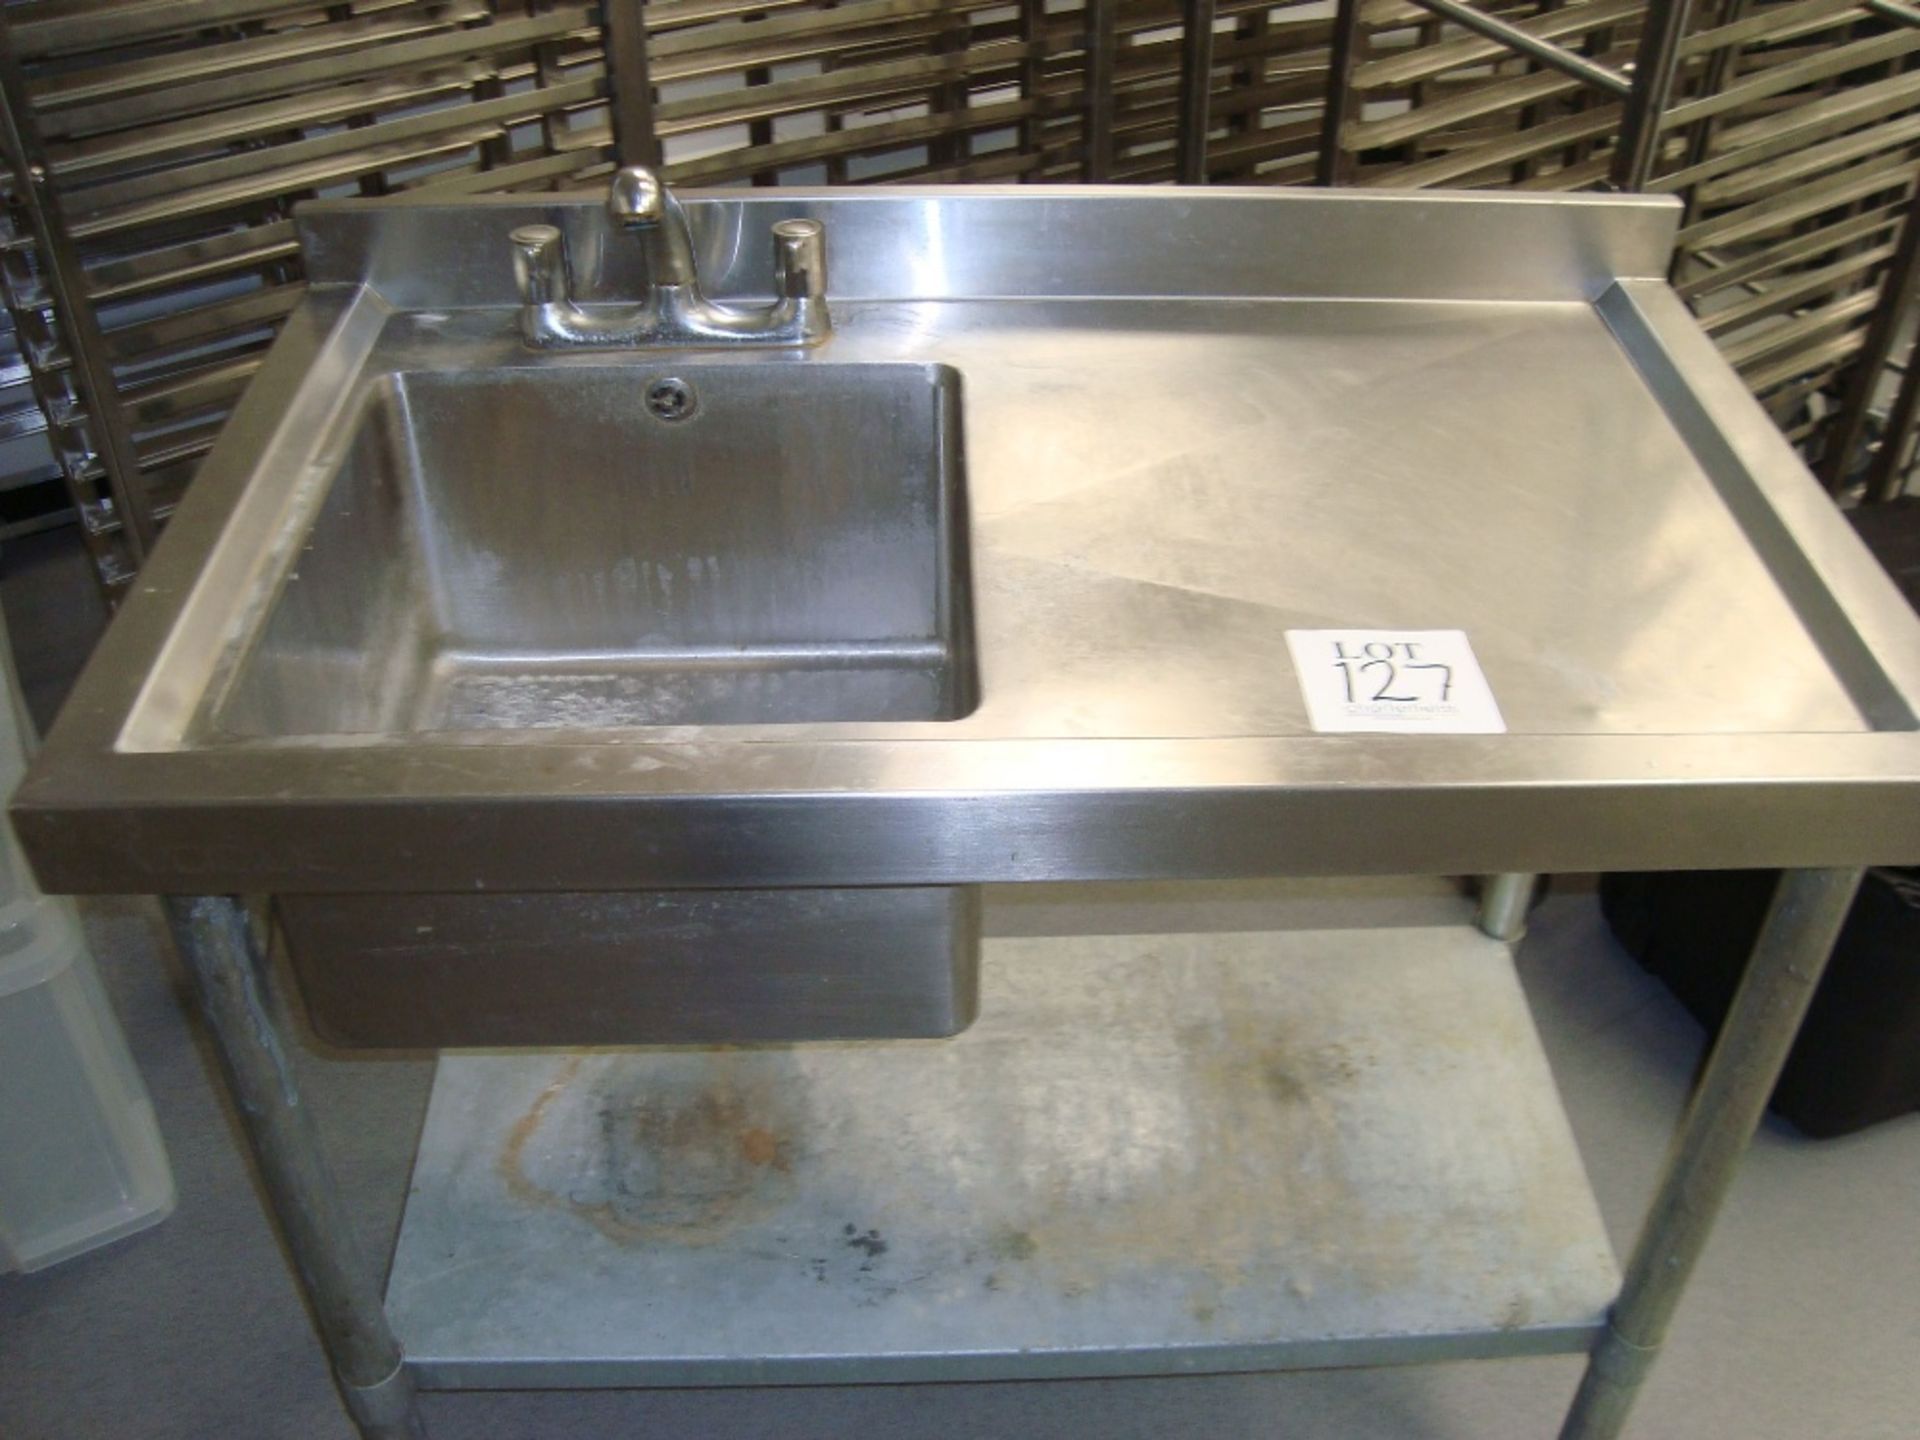 A Vogue stainless steel single deep bowl single drainer sink